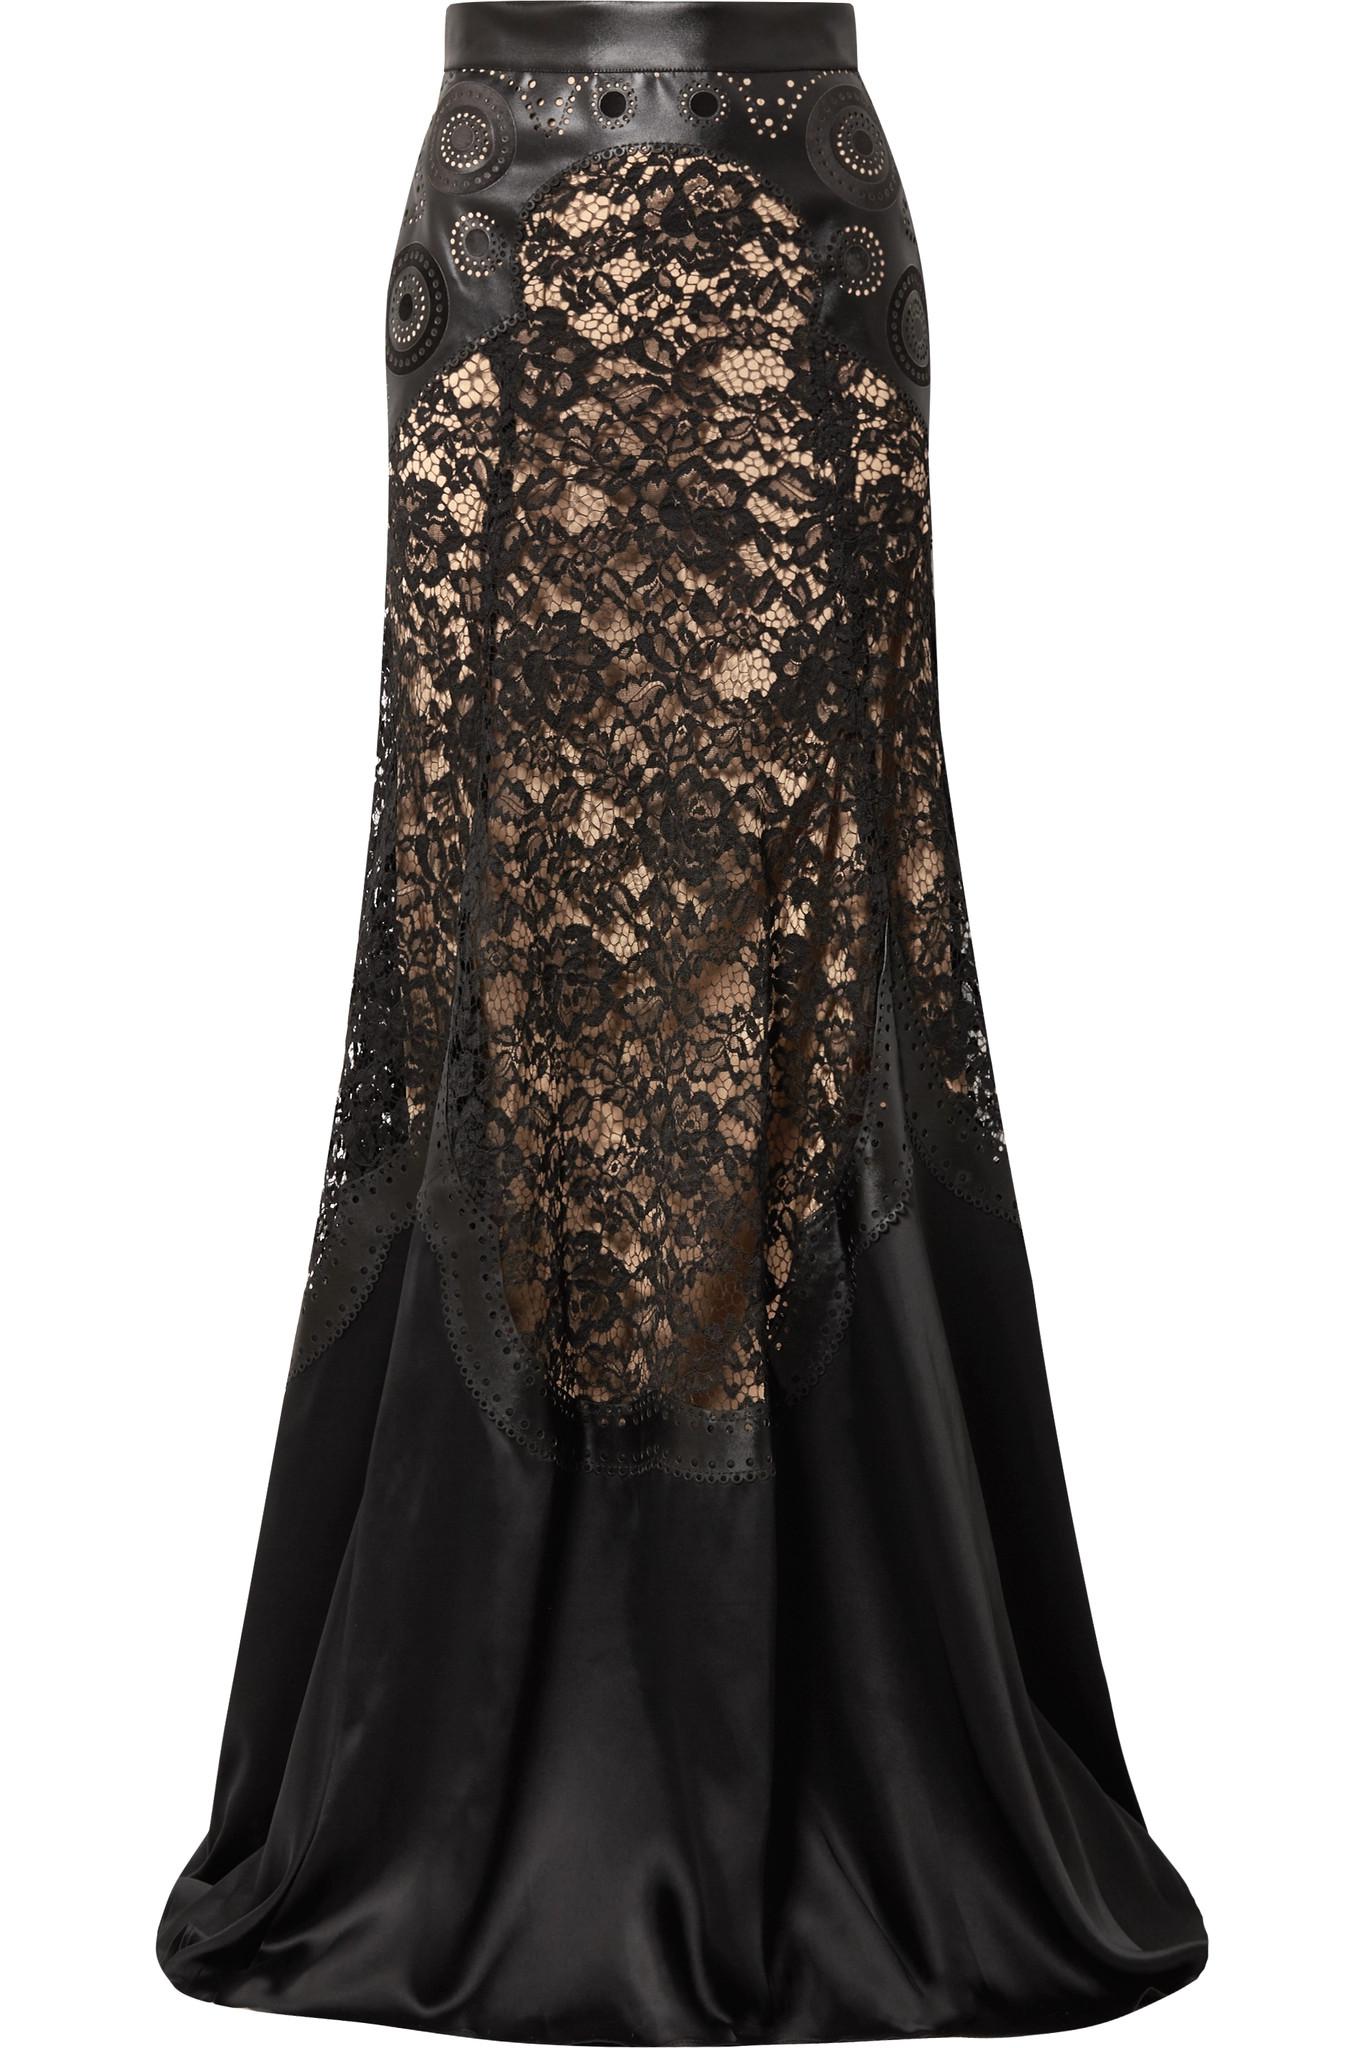 Elie Saab Paneled Laser-cut Satin And Corded Lace Maxi Skirt in Black ...